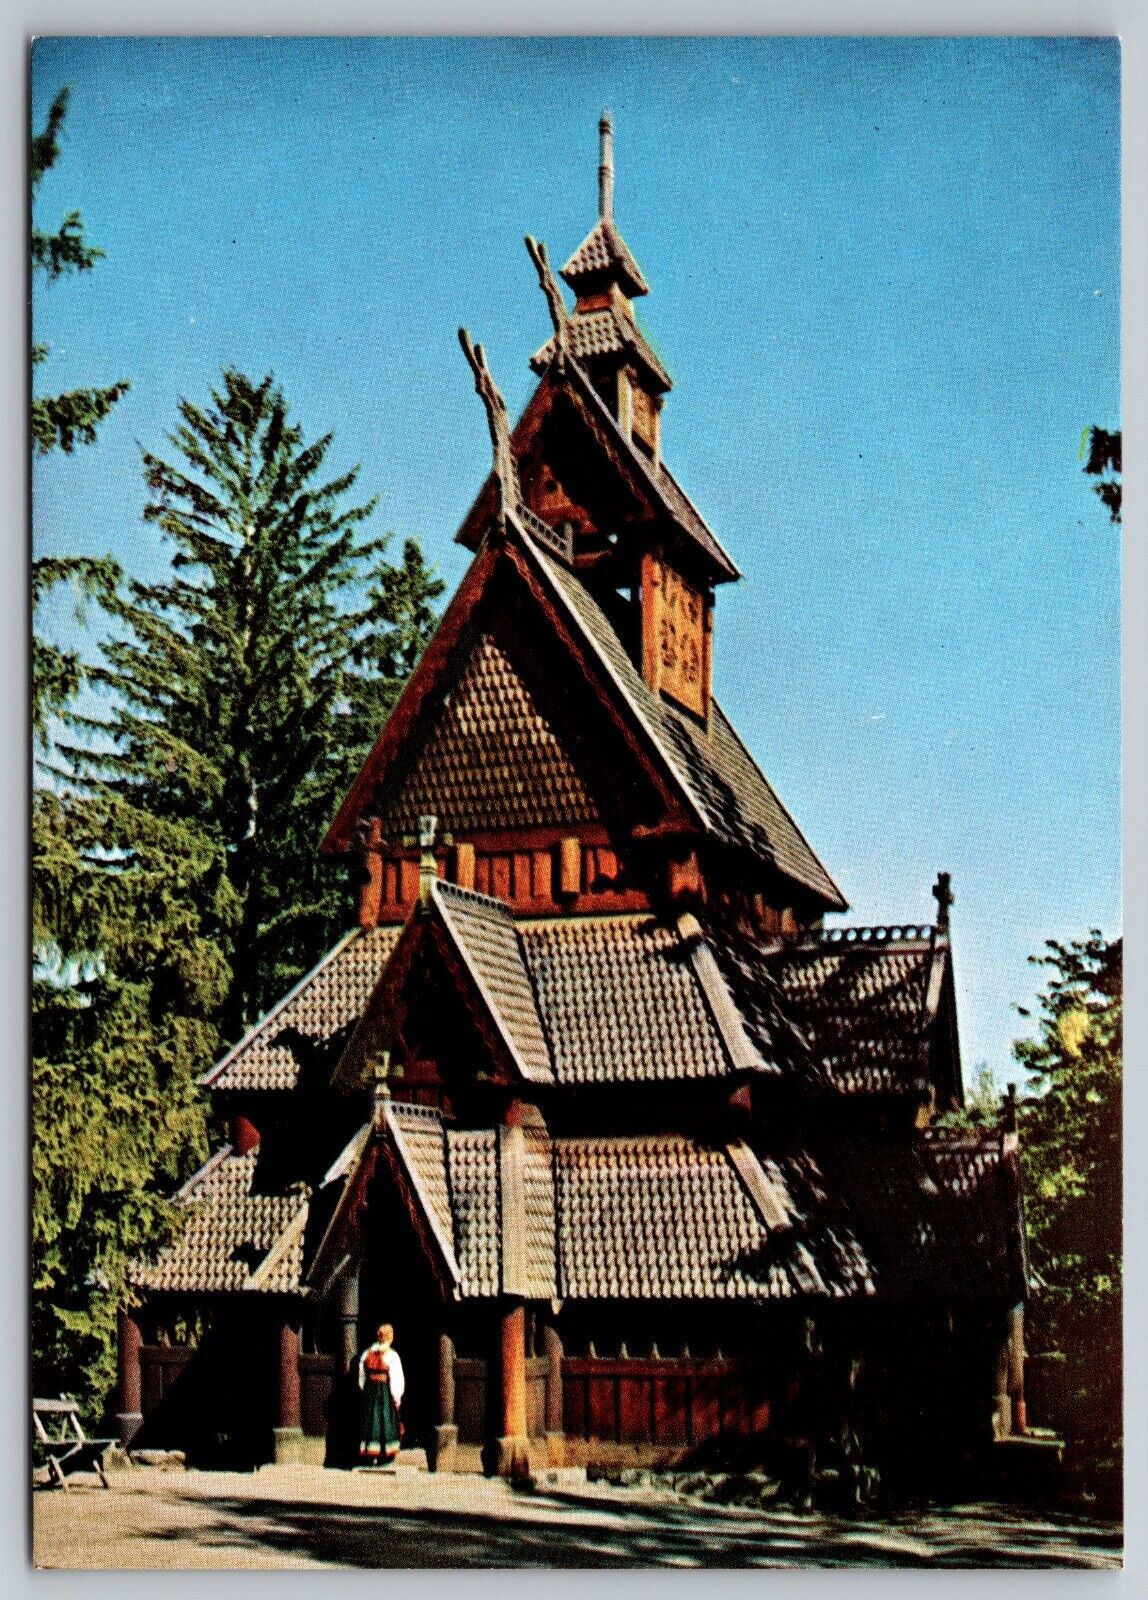 Postcard C 540, Stave-church from Gol c1200, Hallingdall Norway